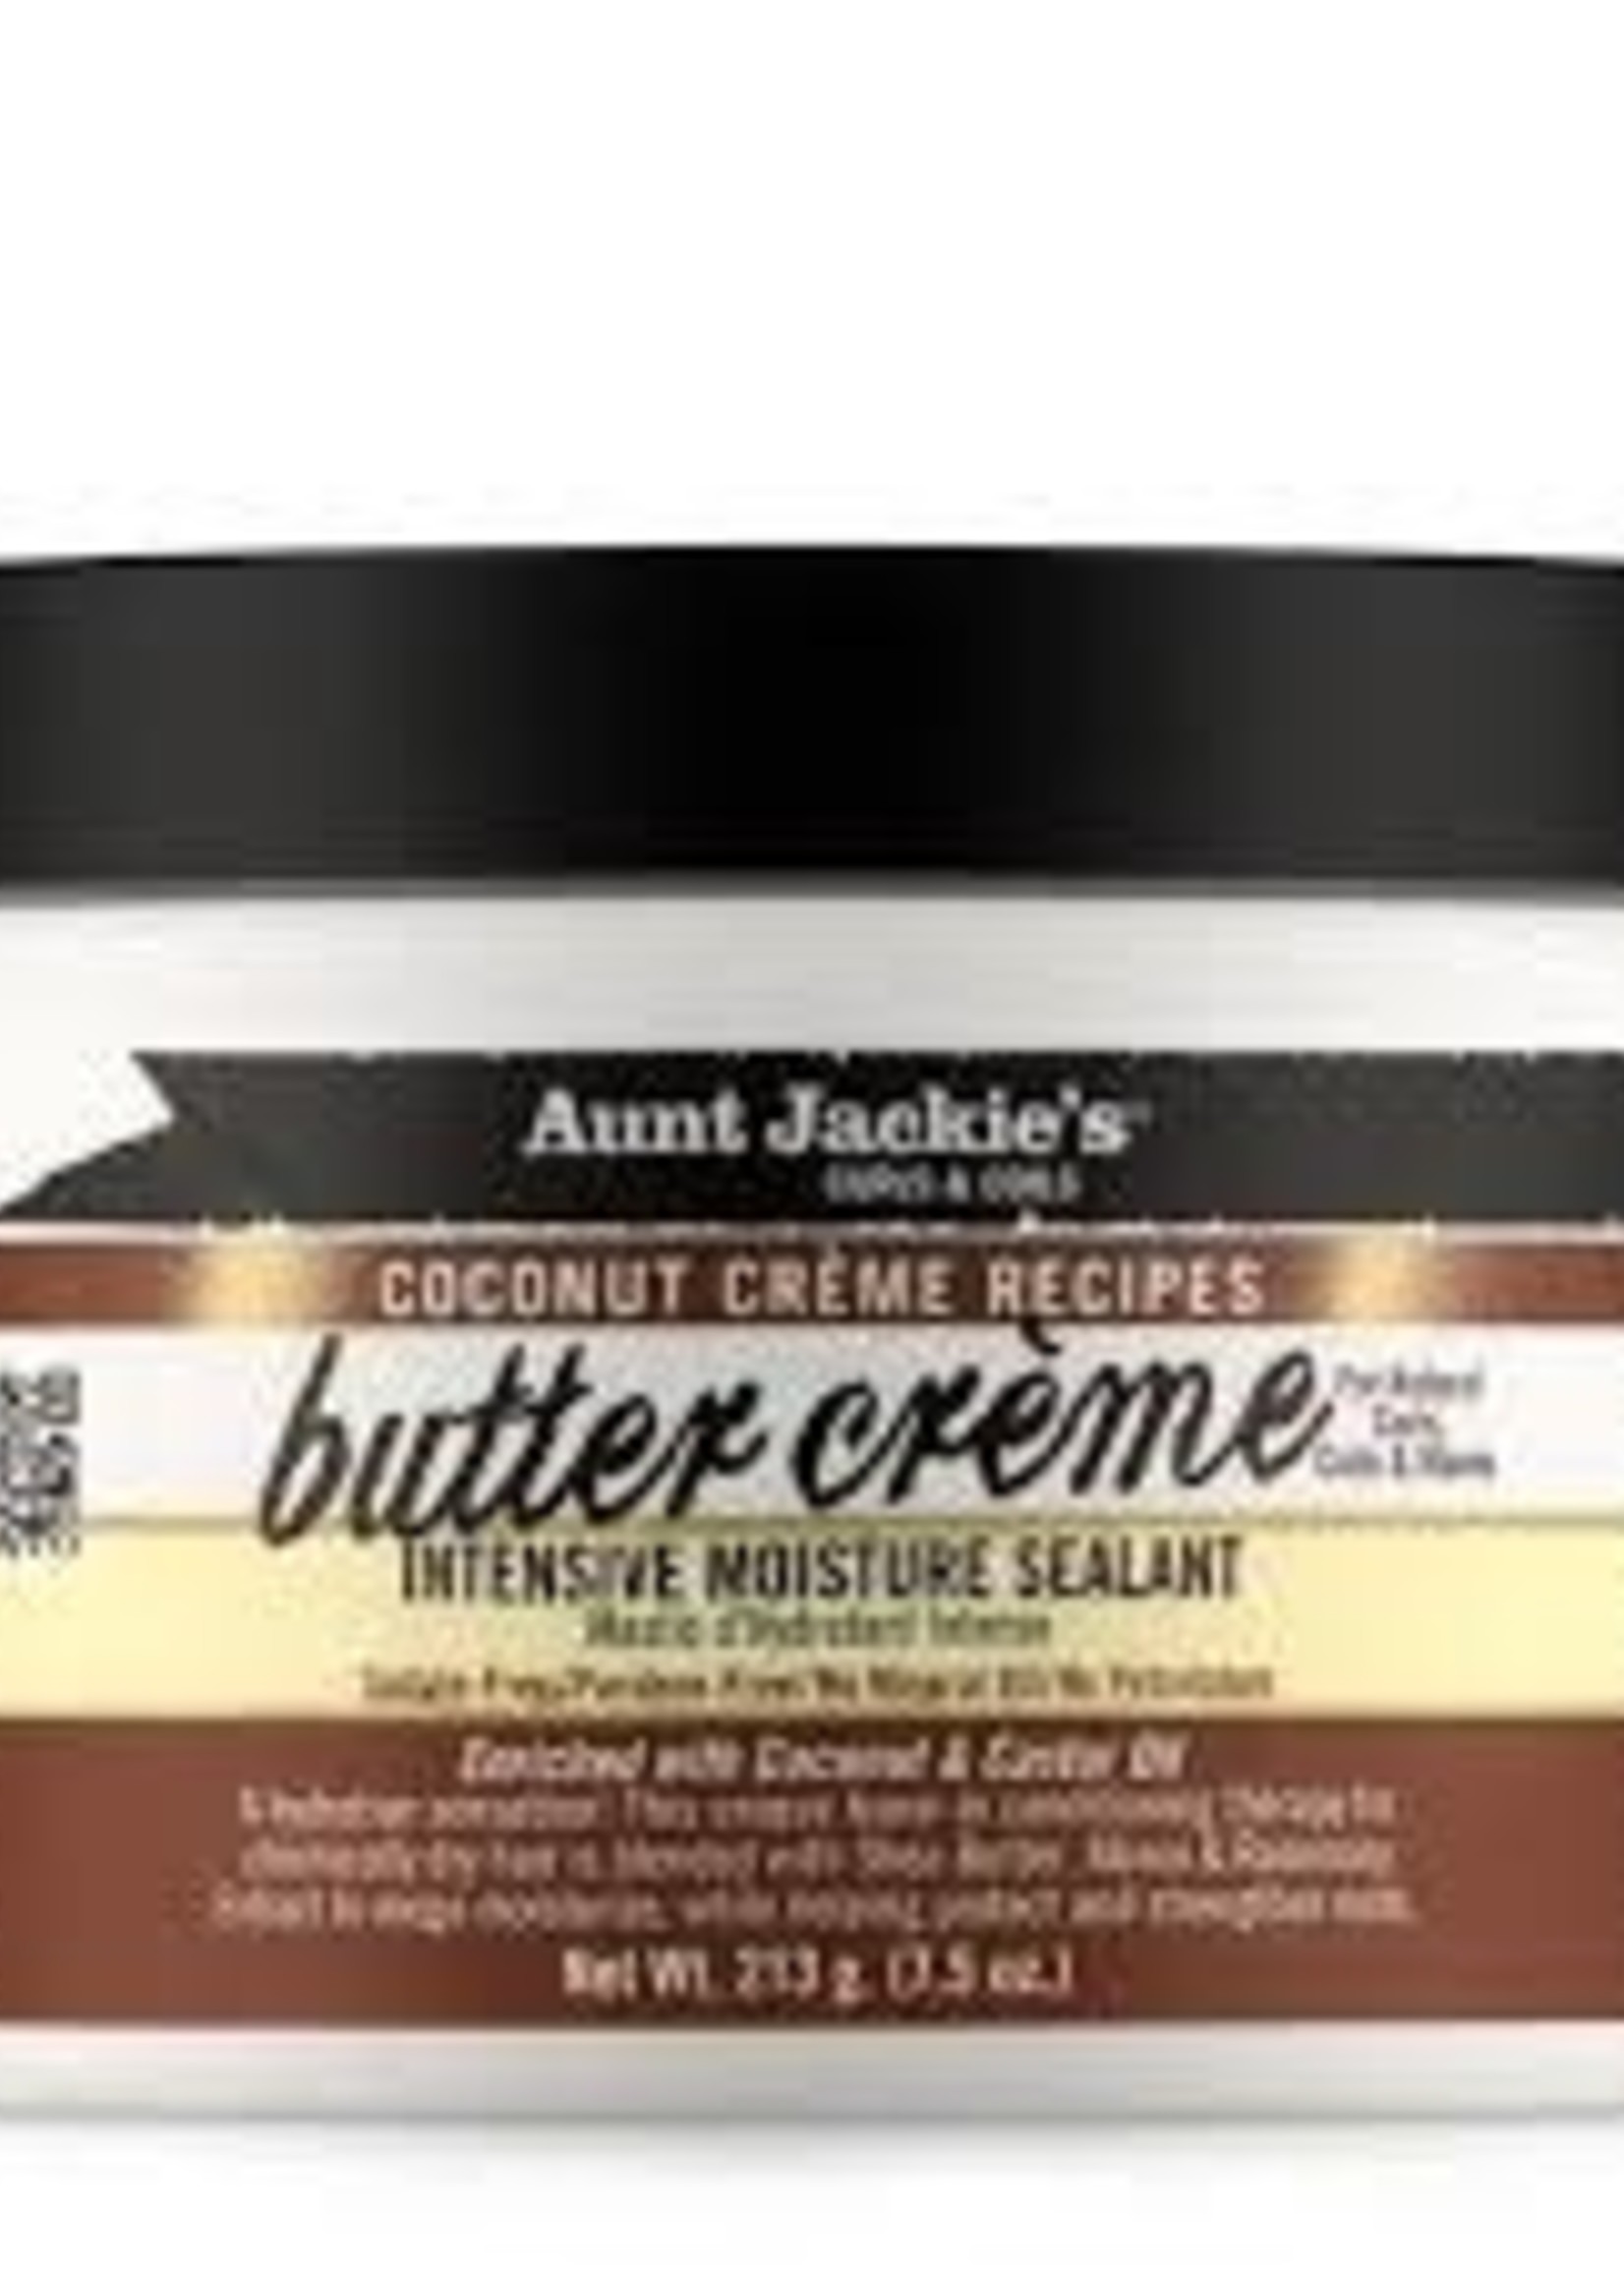 Aunt Jackie's Butter Creme